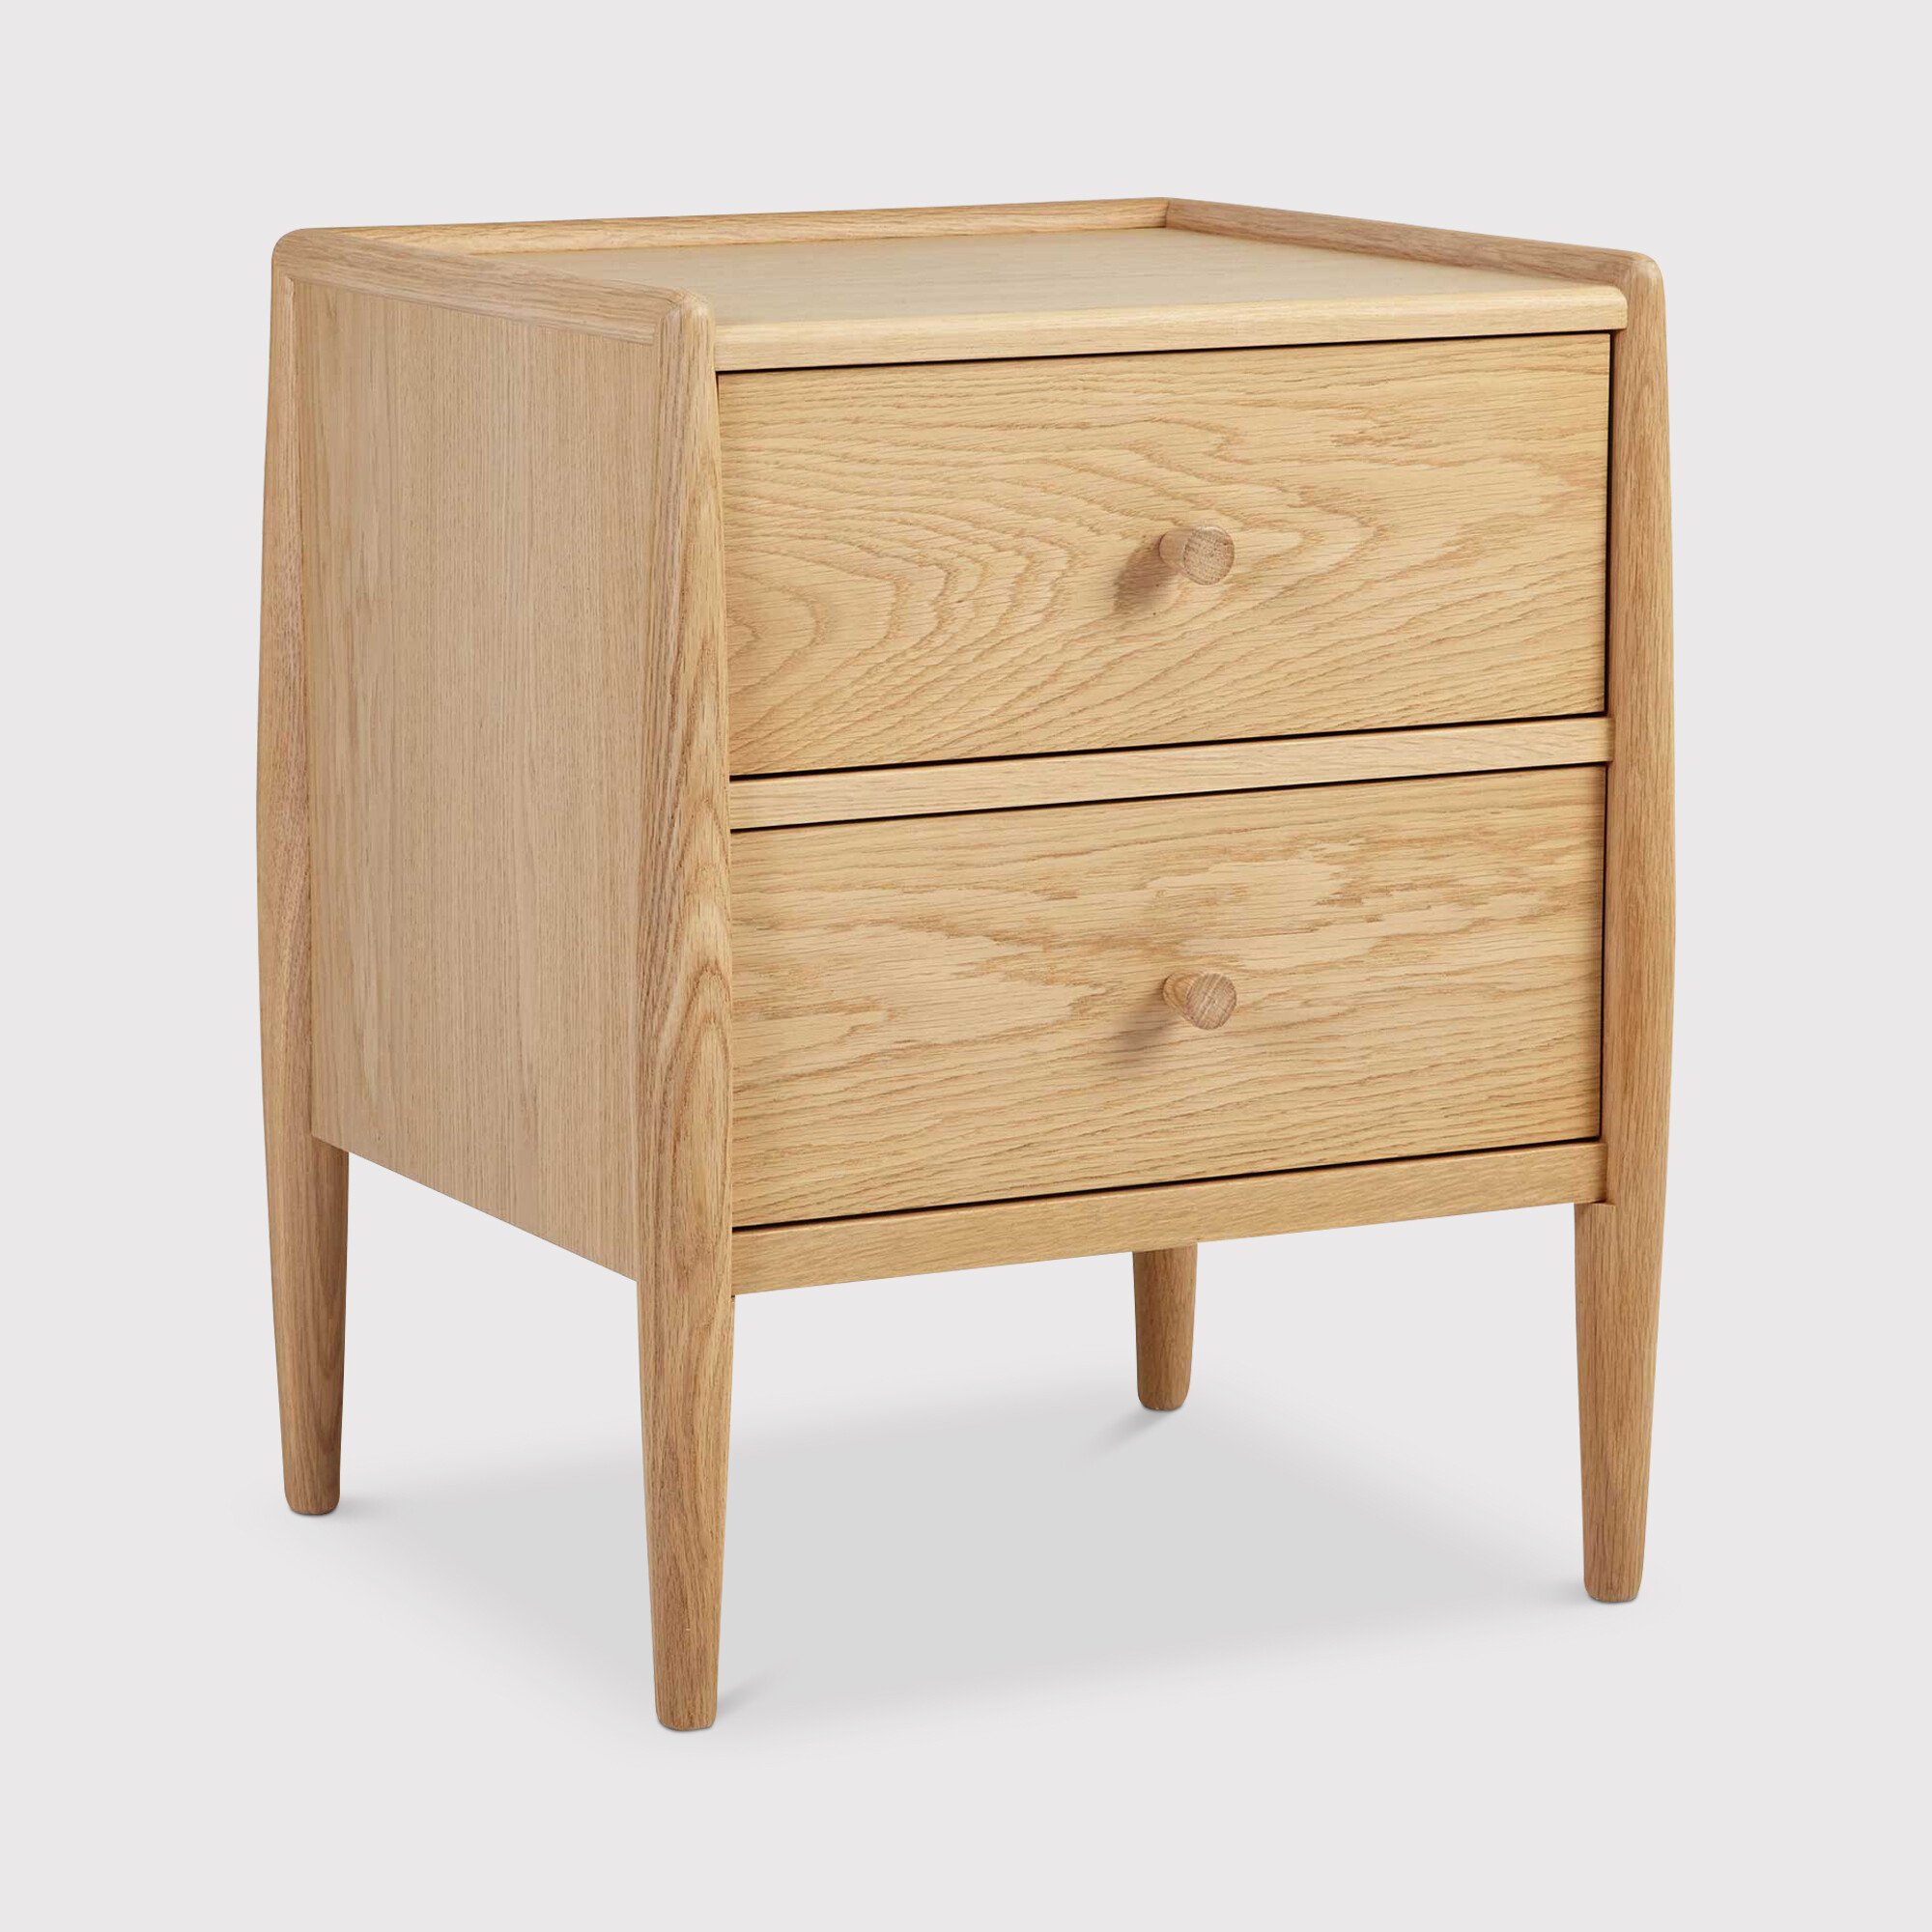 Ercol Winslow 2 Drawer Bedside Chest, Neutral | Barker & Stonehouse